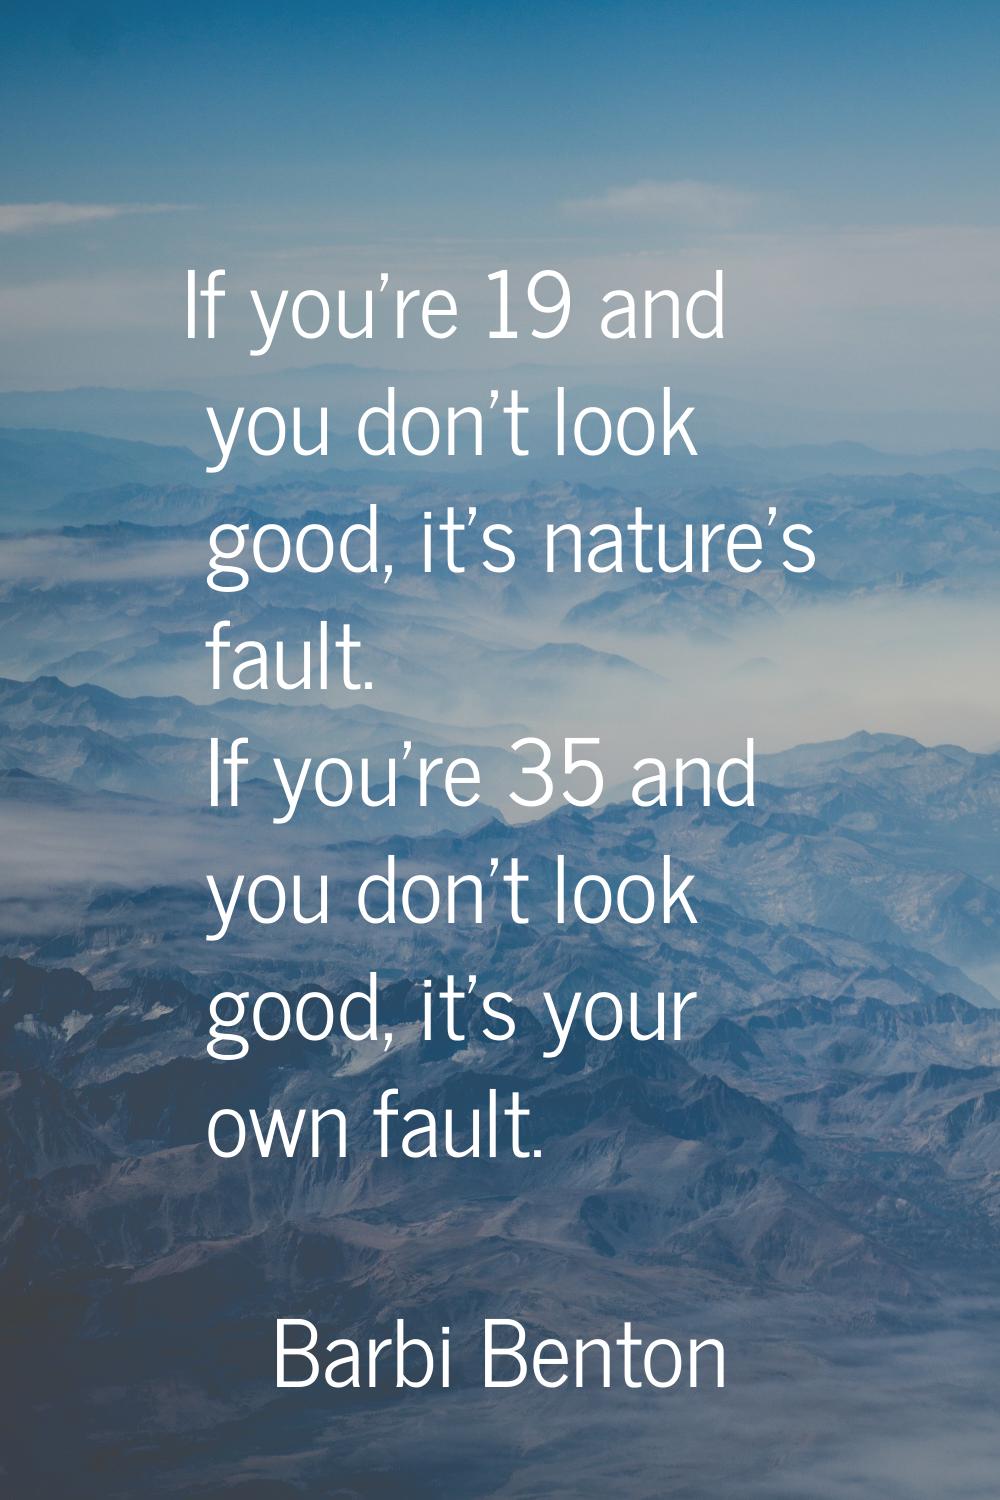 If you're 19 and you don't look good, it's nature's fault. If you're 35 and you don't look good, it